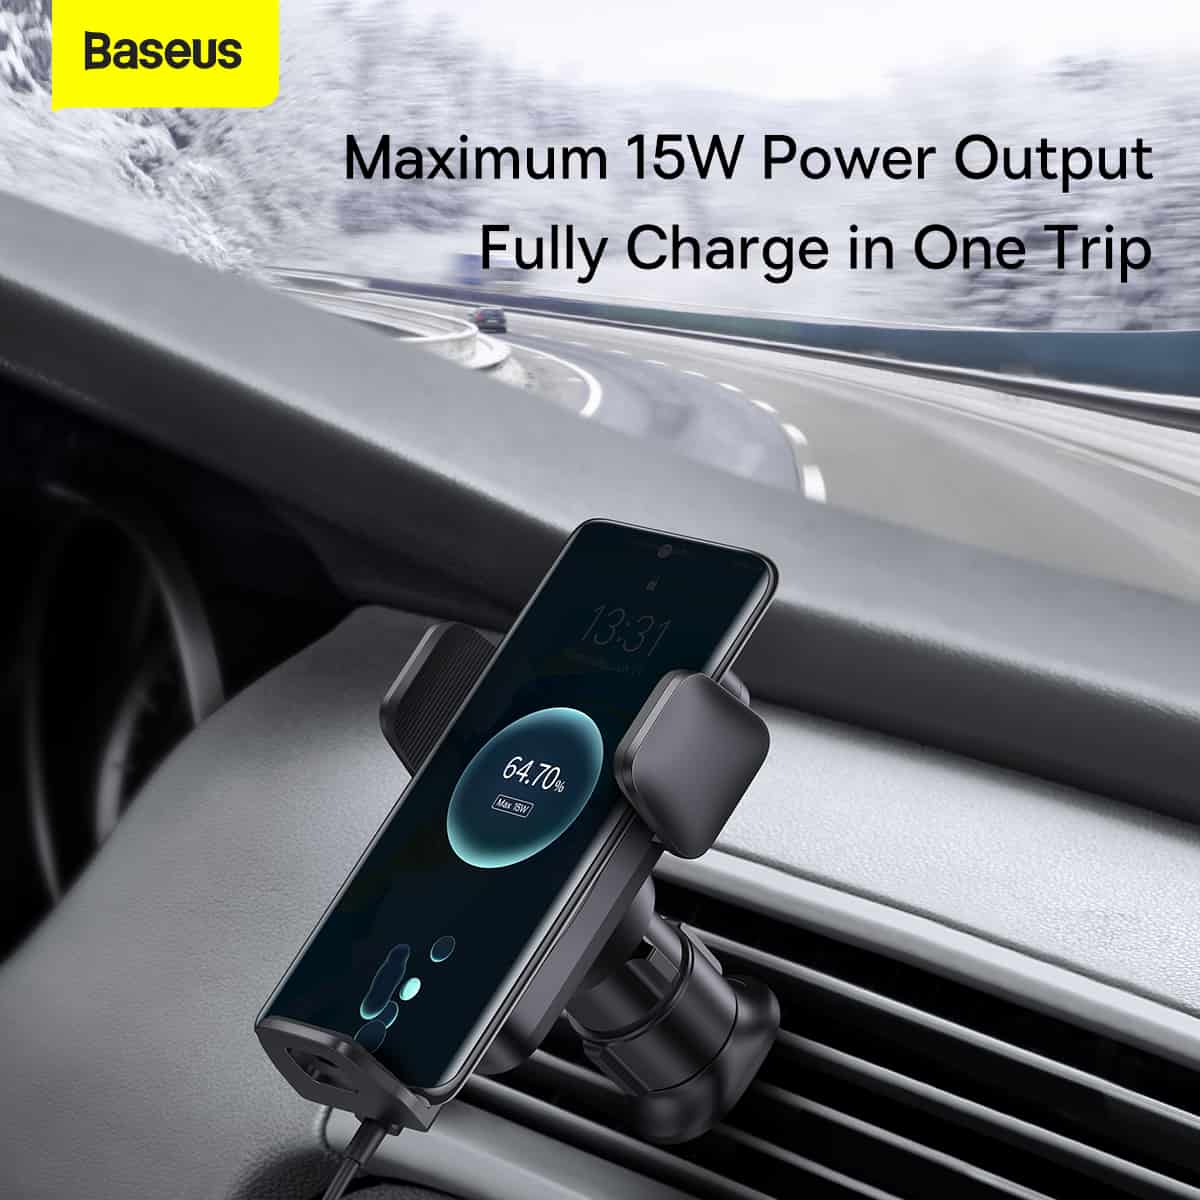 Baseus Wisdom Car Mount Qi 15W Wireless Charger Air Outlet Base 9